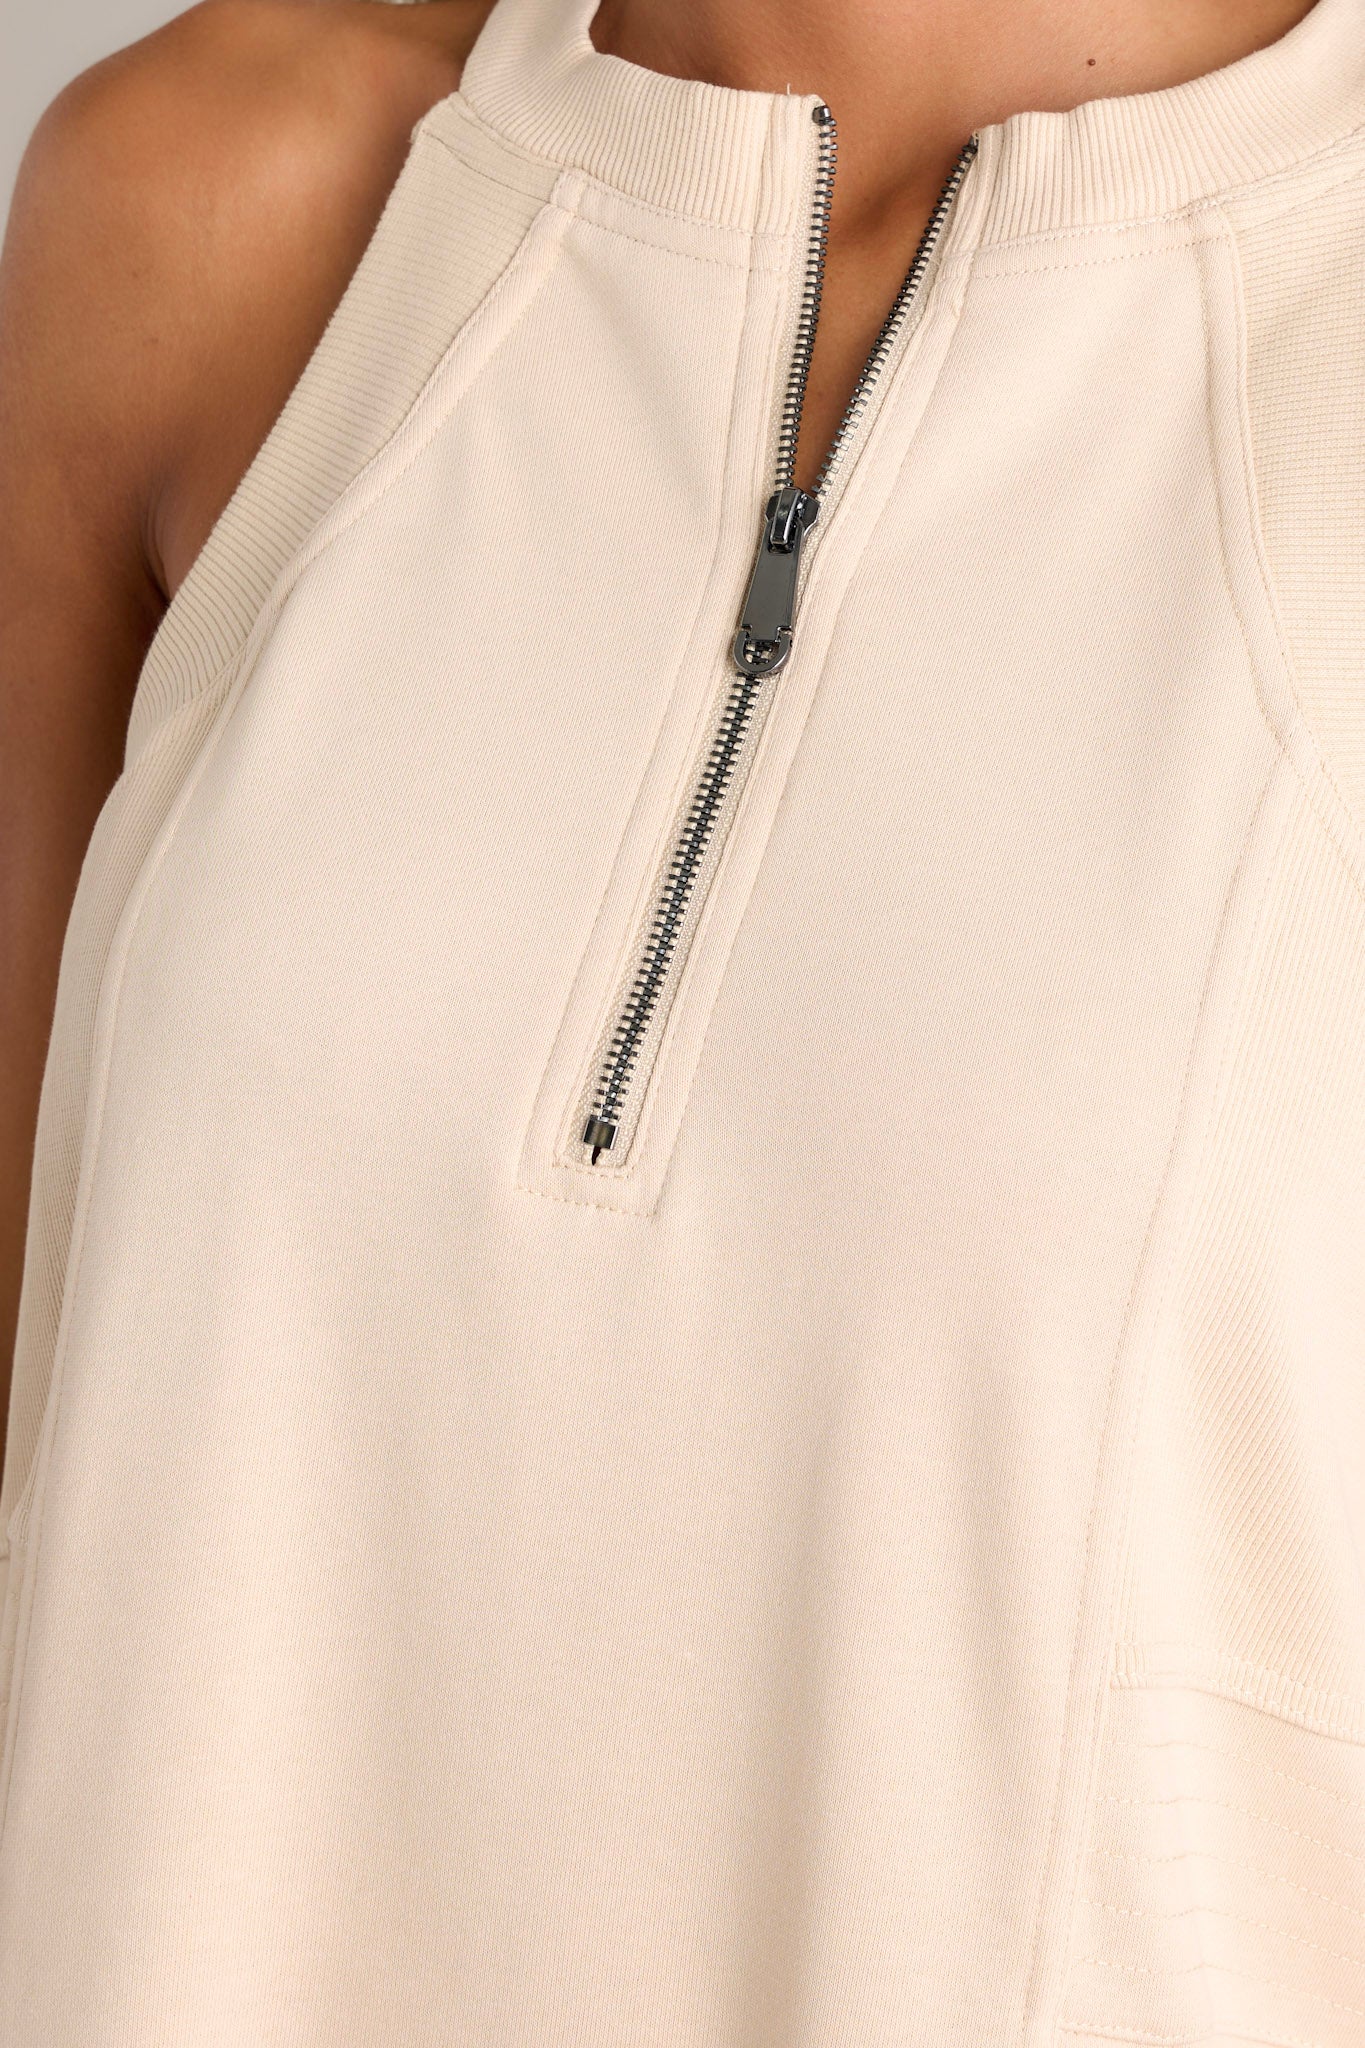 Close-up of the beige mini dress showing the high neckline, functional zipper, and textured sides.